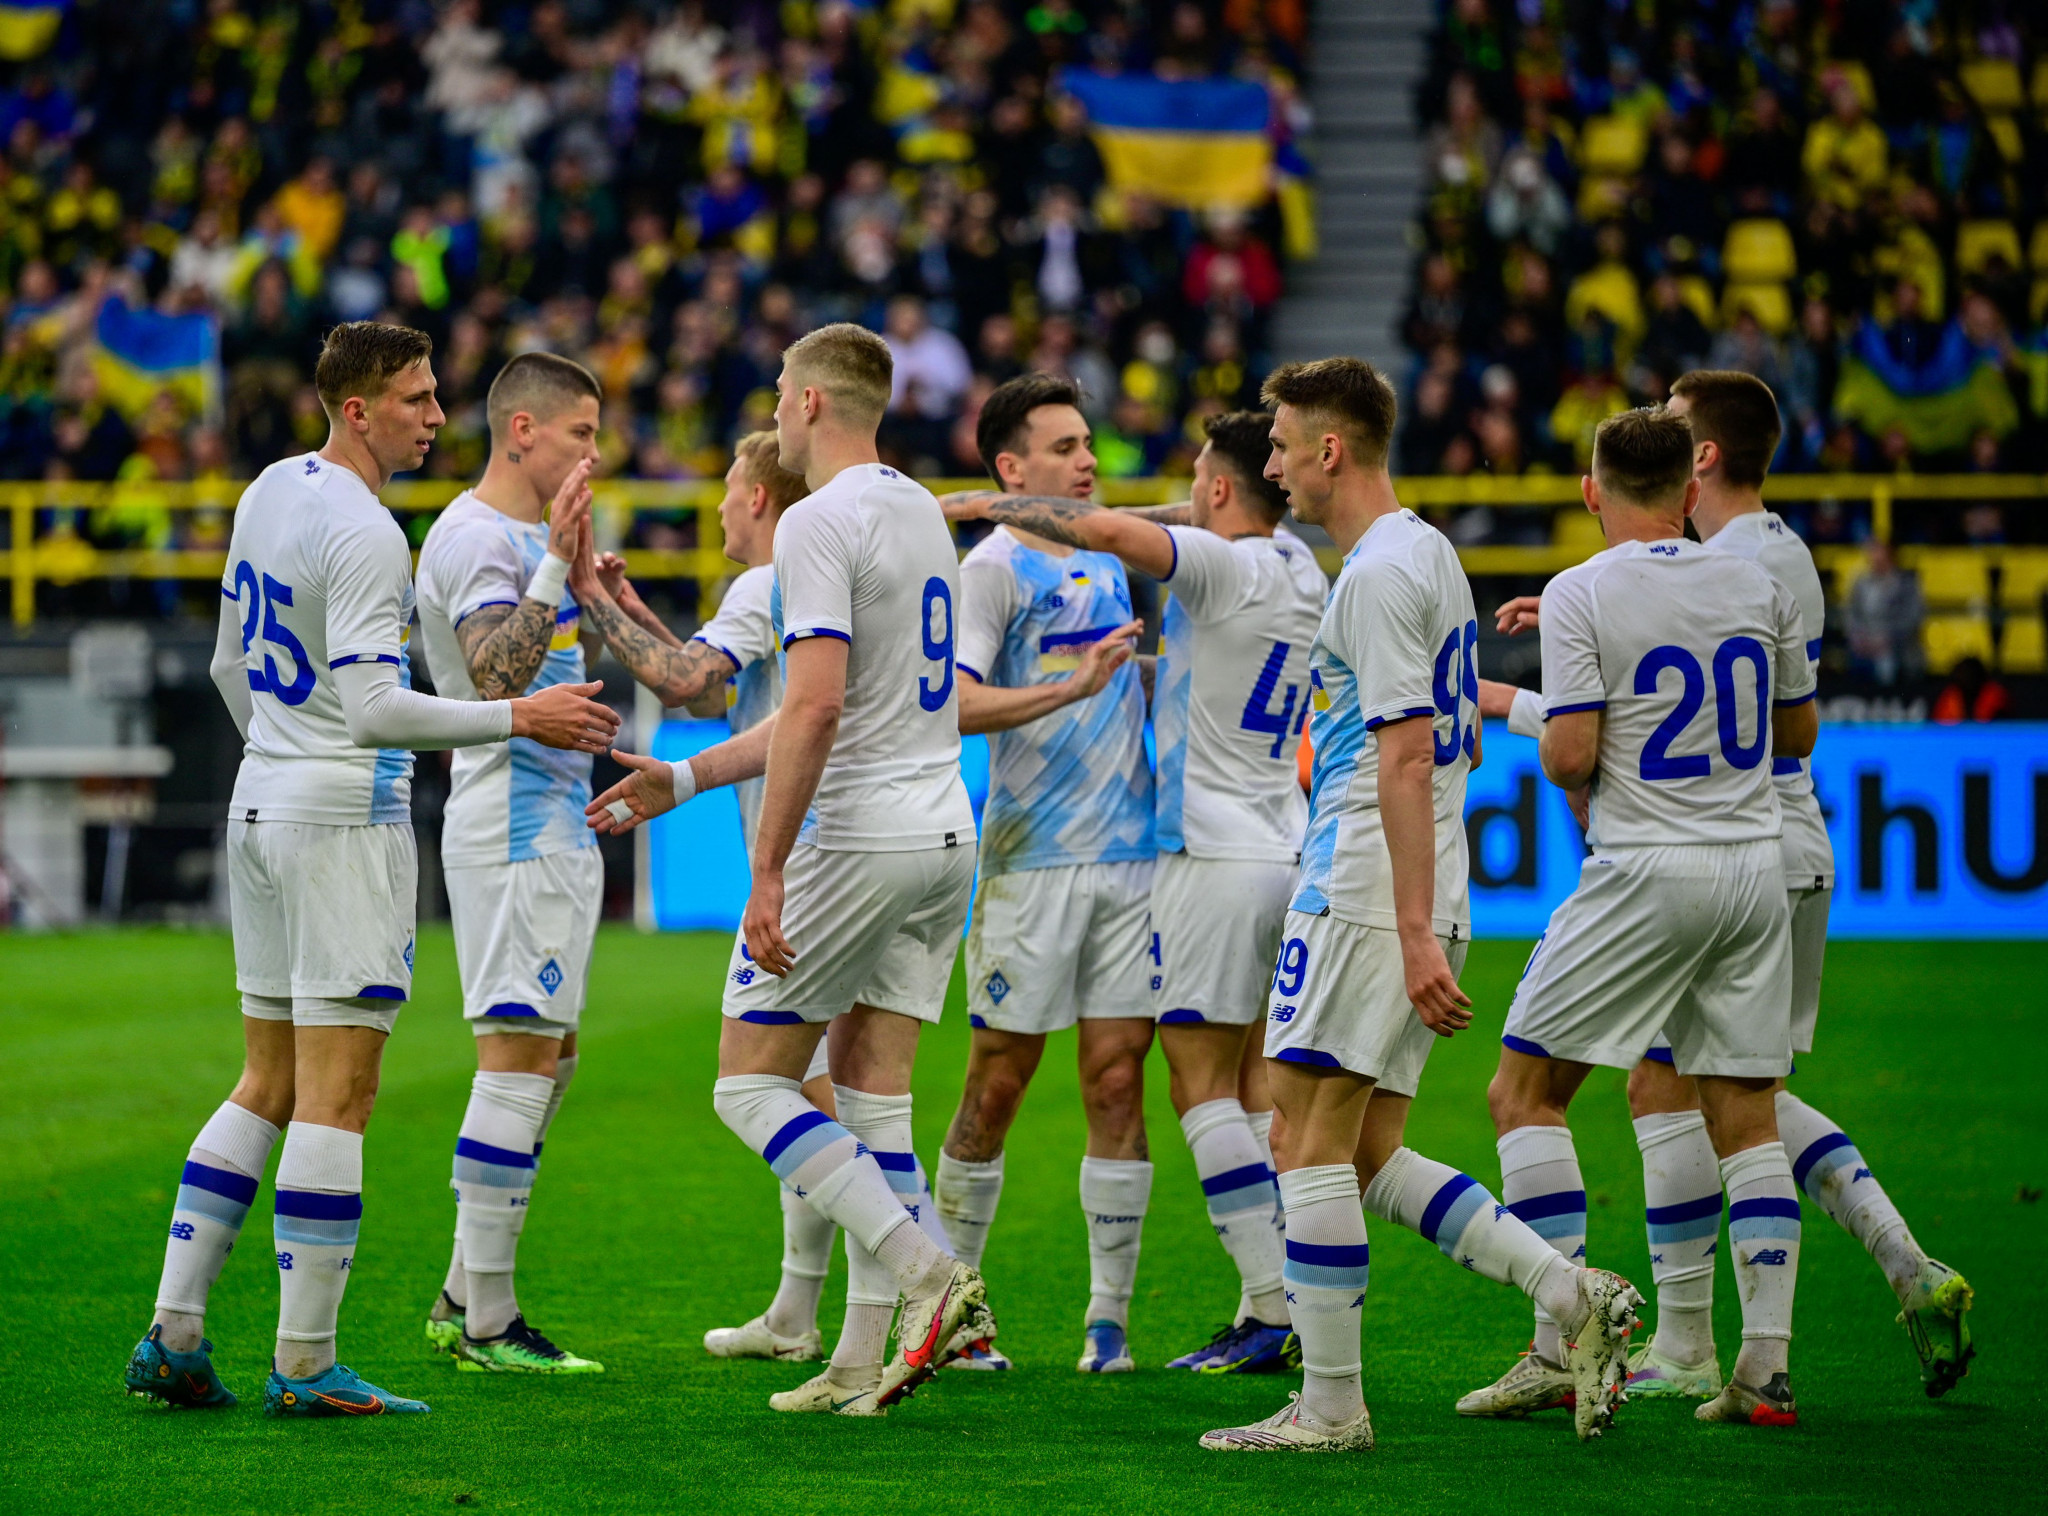 Ukrainian Premier League set to return on August 23 with added security measures